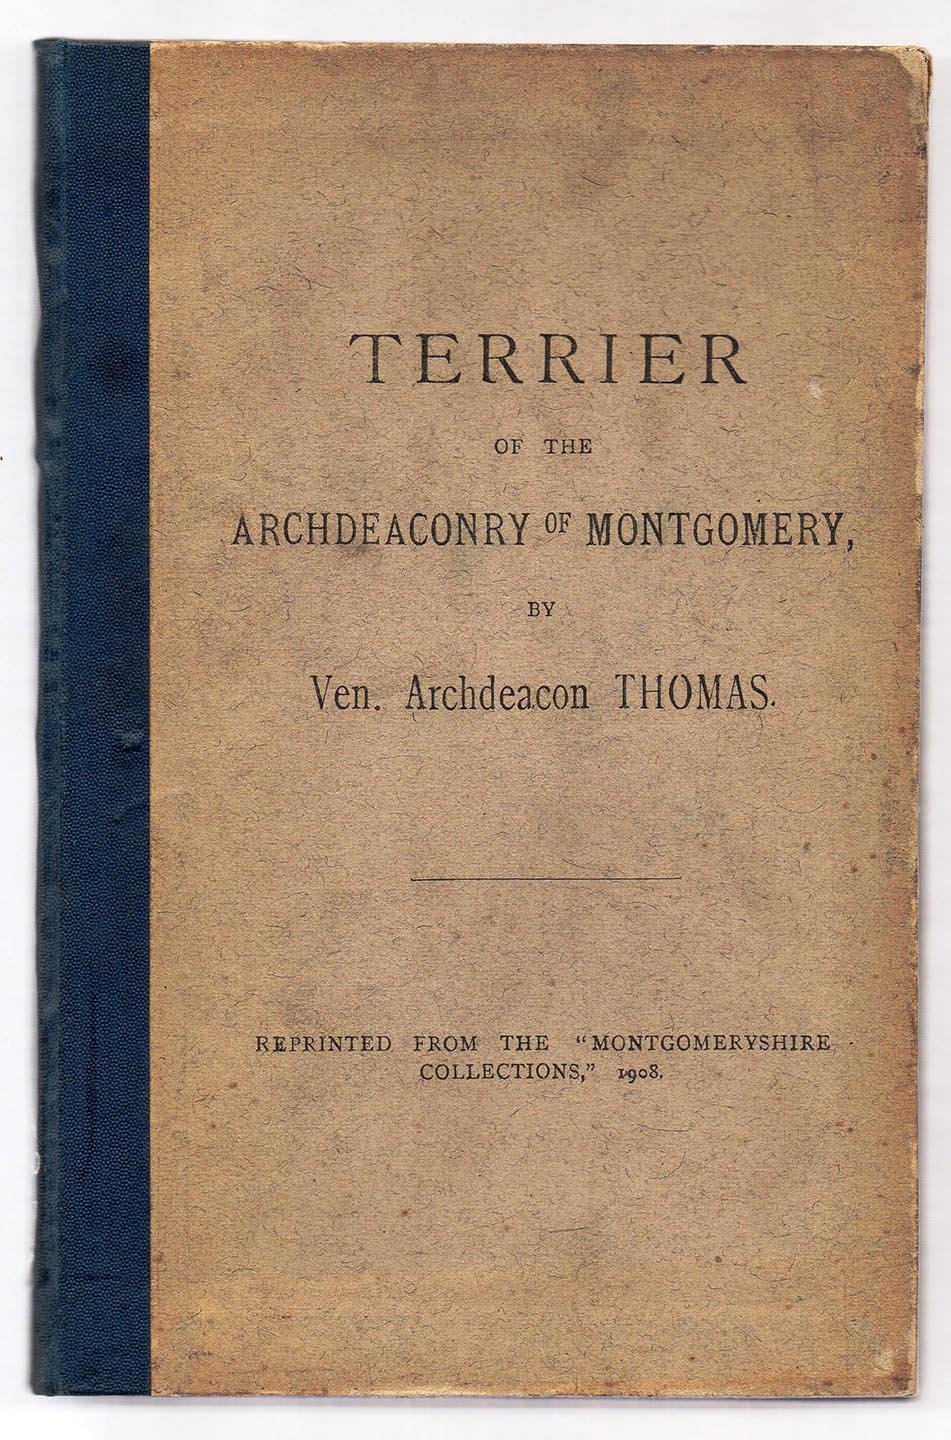 Terrier of the Archdeaconry of Montgomery